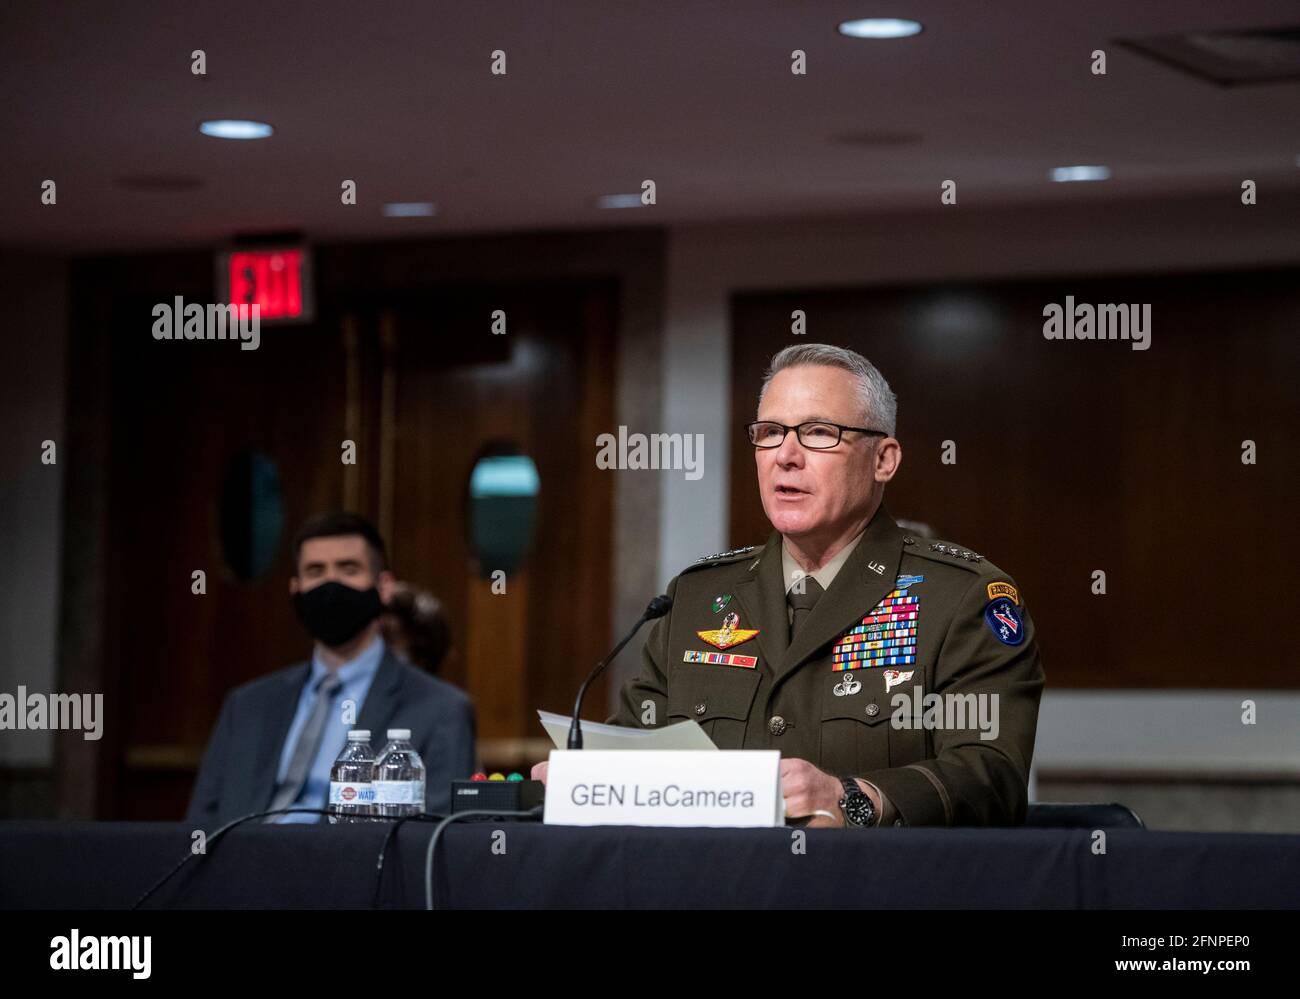 Washington, United States Of America. 18th May, 2021. General Paul J. LaCamera appears before a Senate Committee on Armed Services hearing for reappointment to the grade of general and to be Commander, United Nations Command /Combined Forces Command/United States Forces Korea, Department of Defense, in the Dirksen Senate Office Building in Washington, DC, Tuesday, May 18, 2021. Credit: Rod Lamkey/CNP/Sipa USA Credit: Sipa USA/Alamy Live News Stock Photo